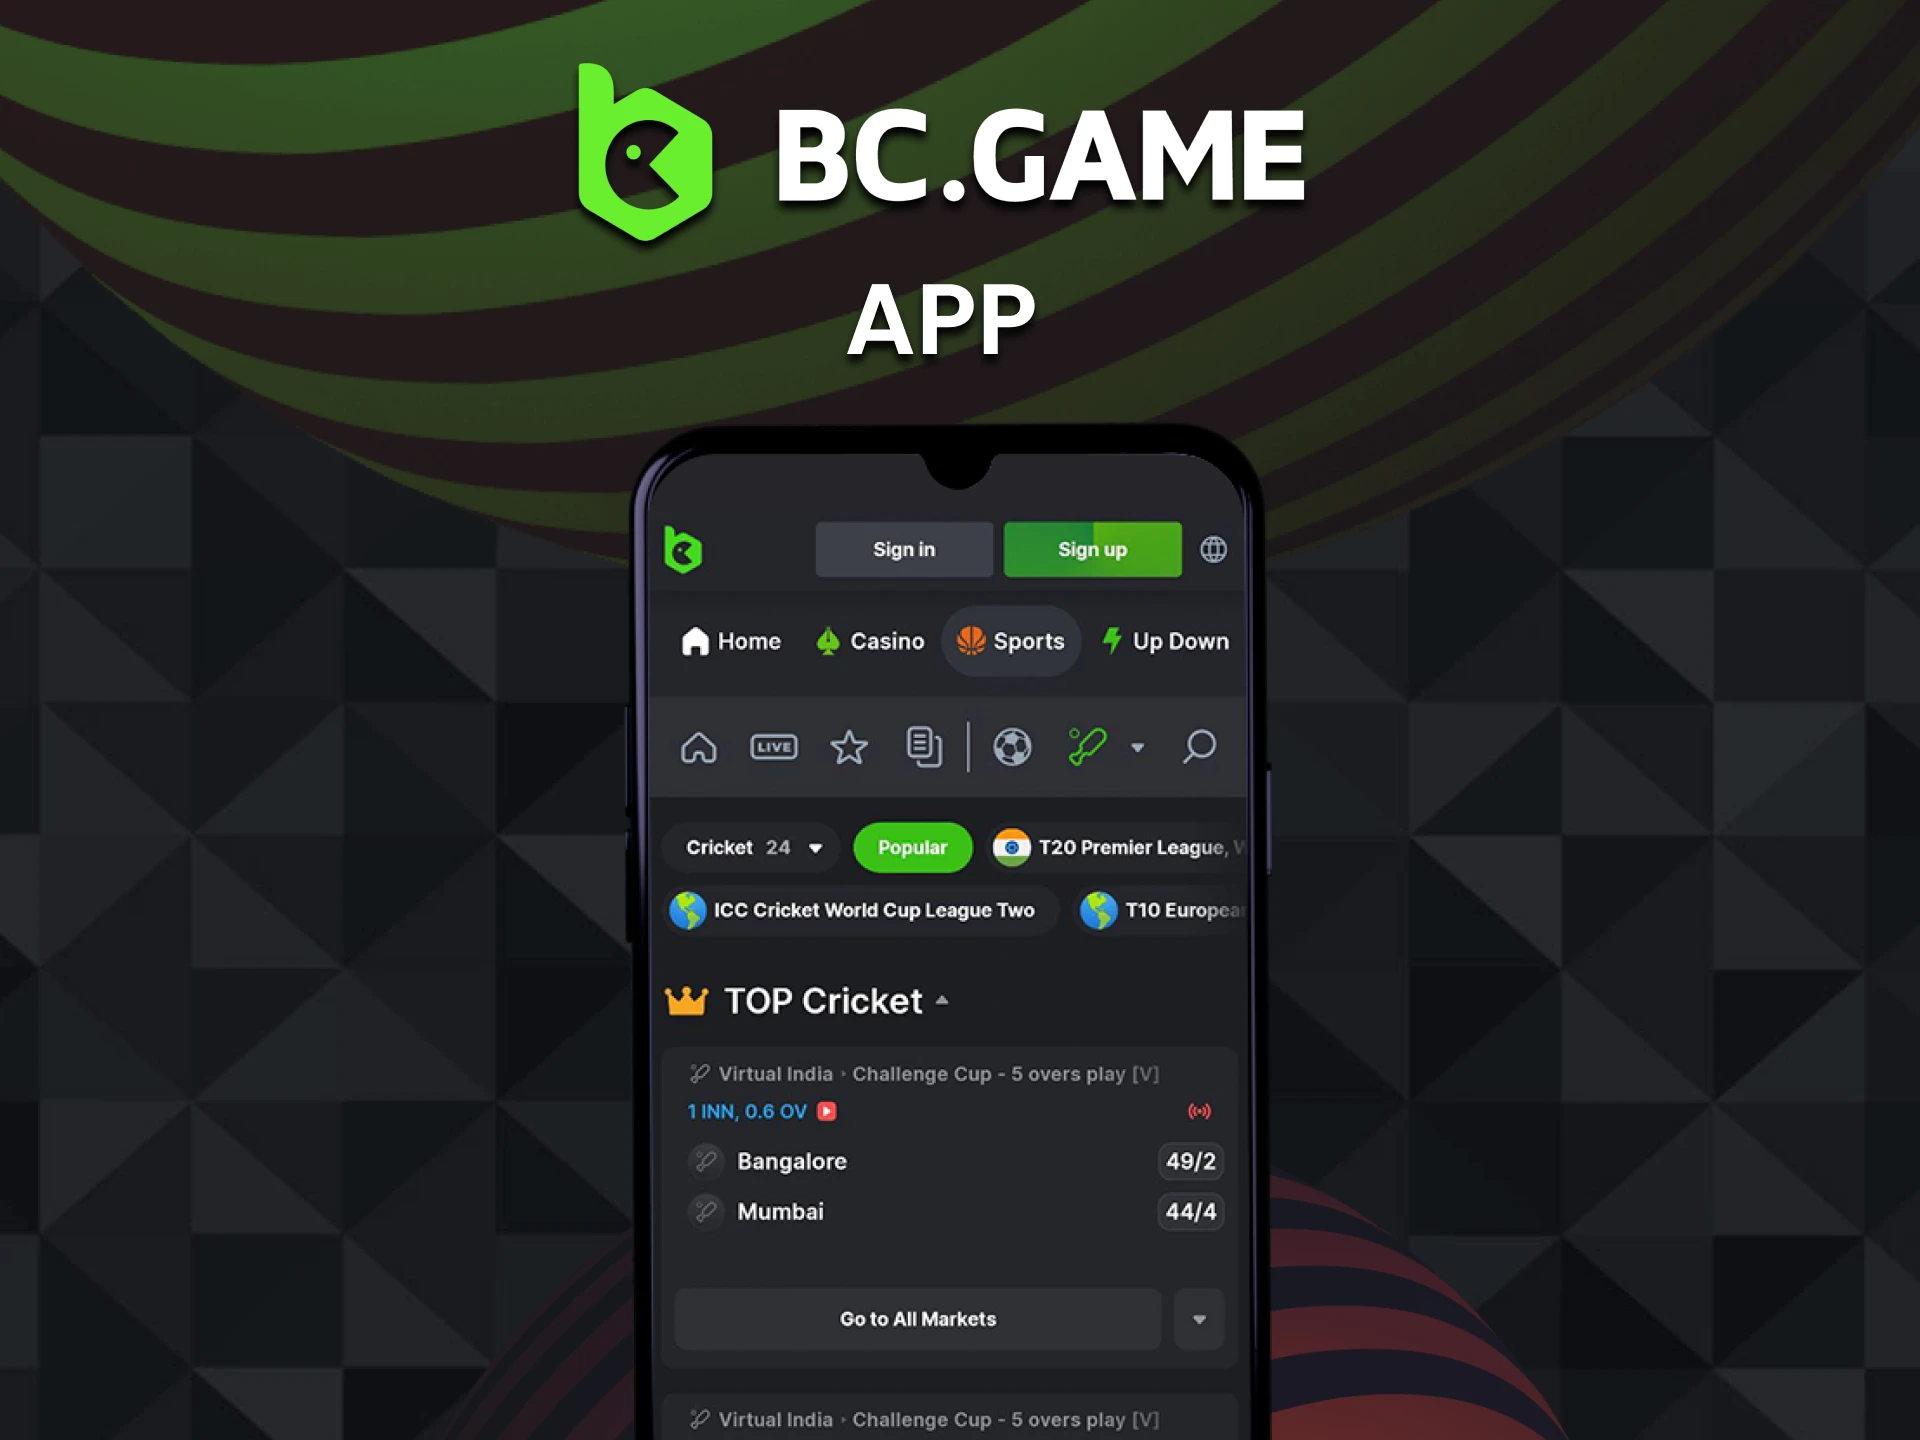 You can place bets on cricket using the BC Game app.